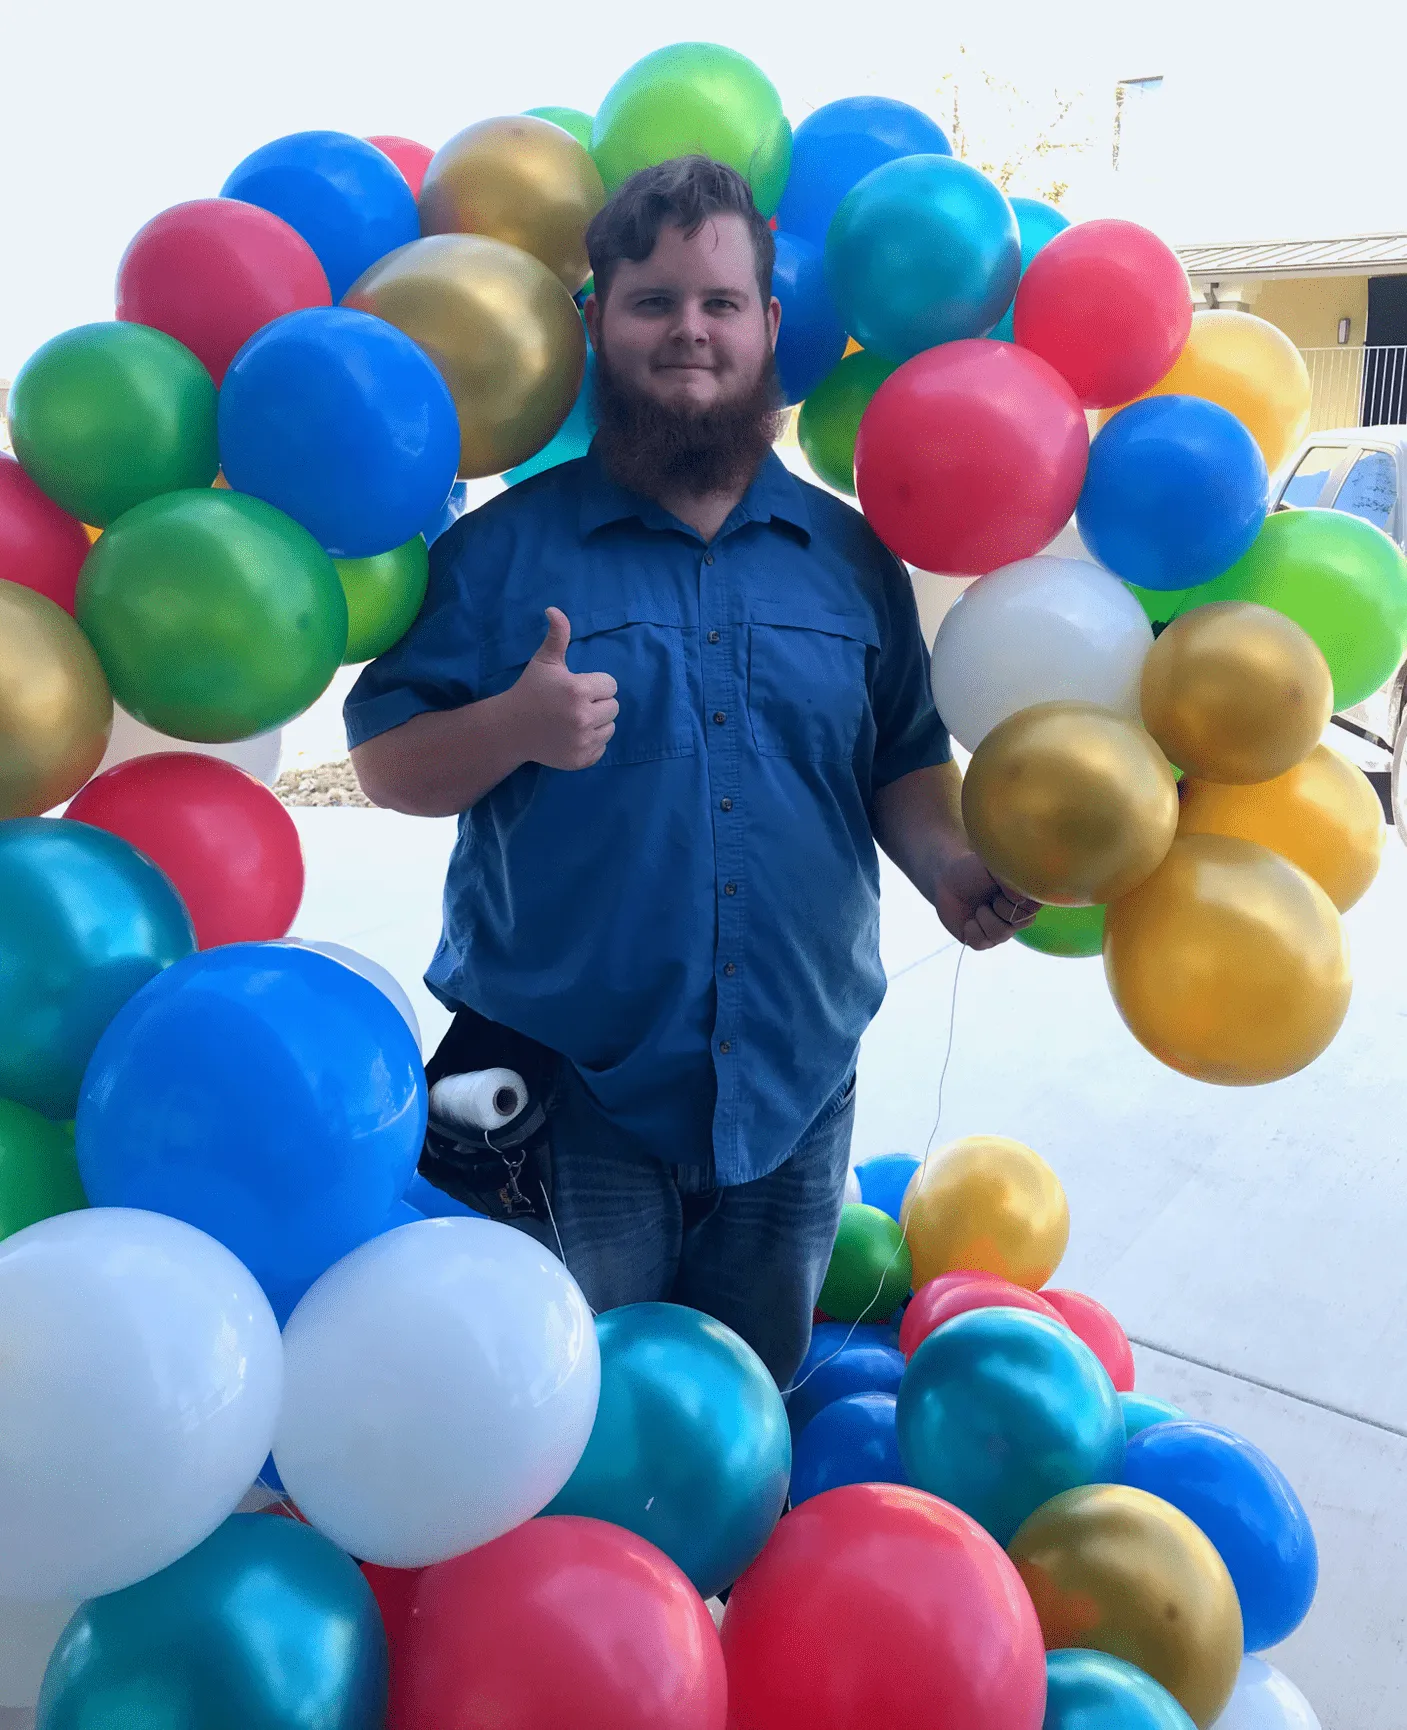 a man with a beard is standing in front of a bunch of balloons and giving a thumbs up